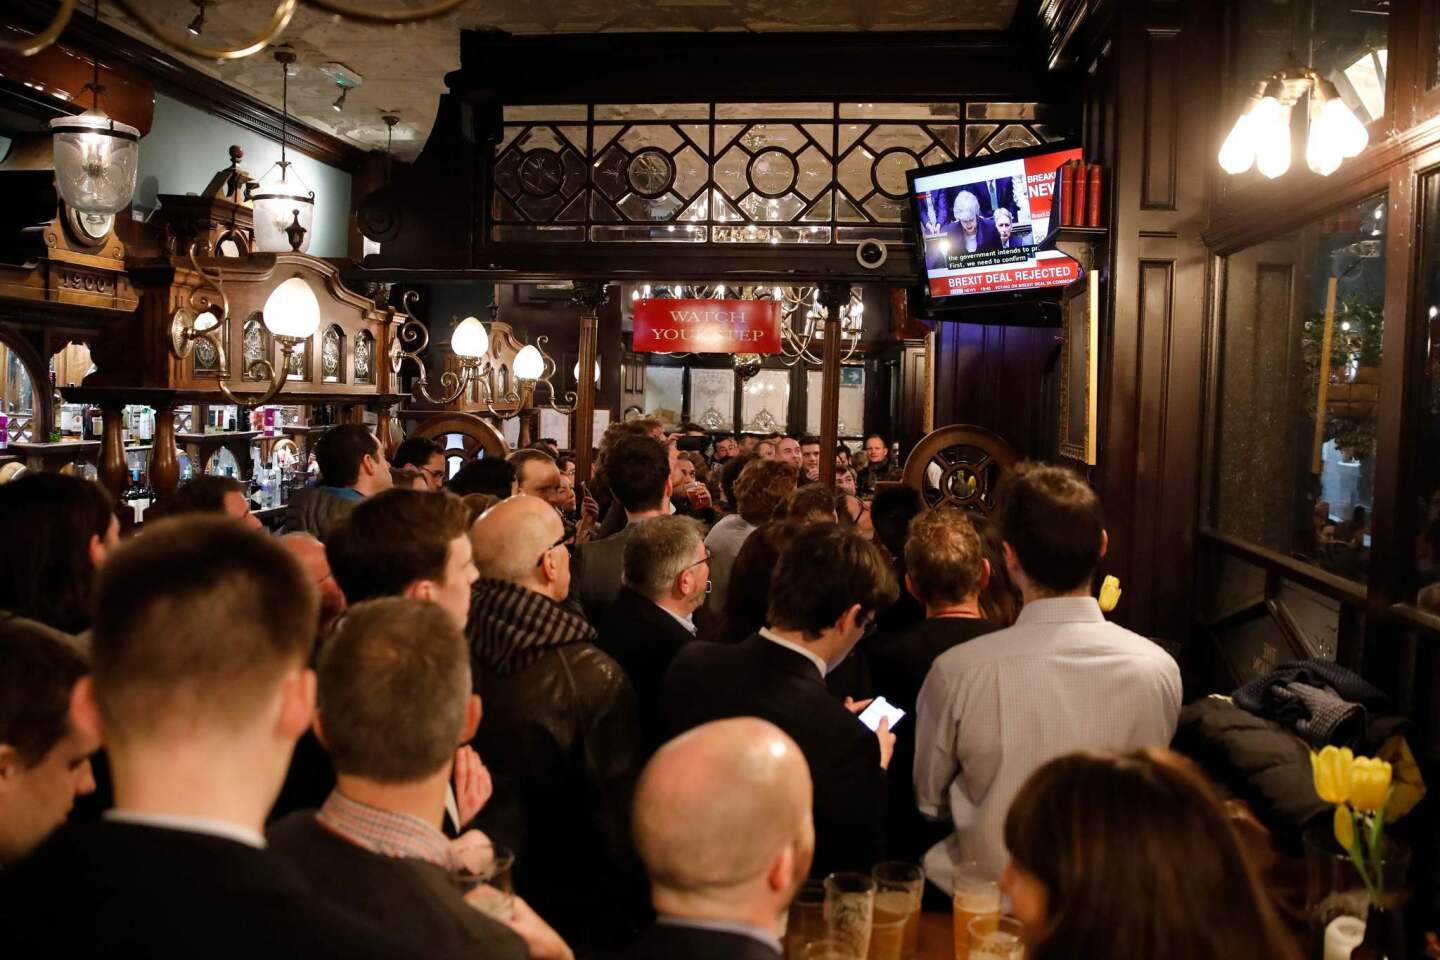 Patrons watch a television screen in the Red Lion public house on Whitehall, as it shows Britain's Prime Minister Theresa May speaking in the Houses of Parliament in London, after MPs vote against the government's Brexit deal.